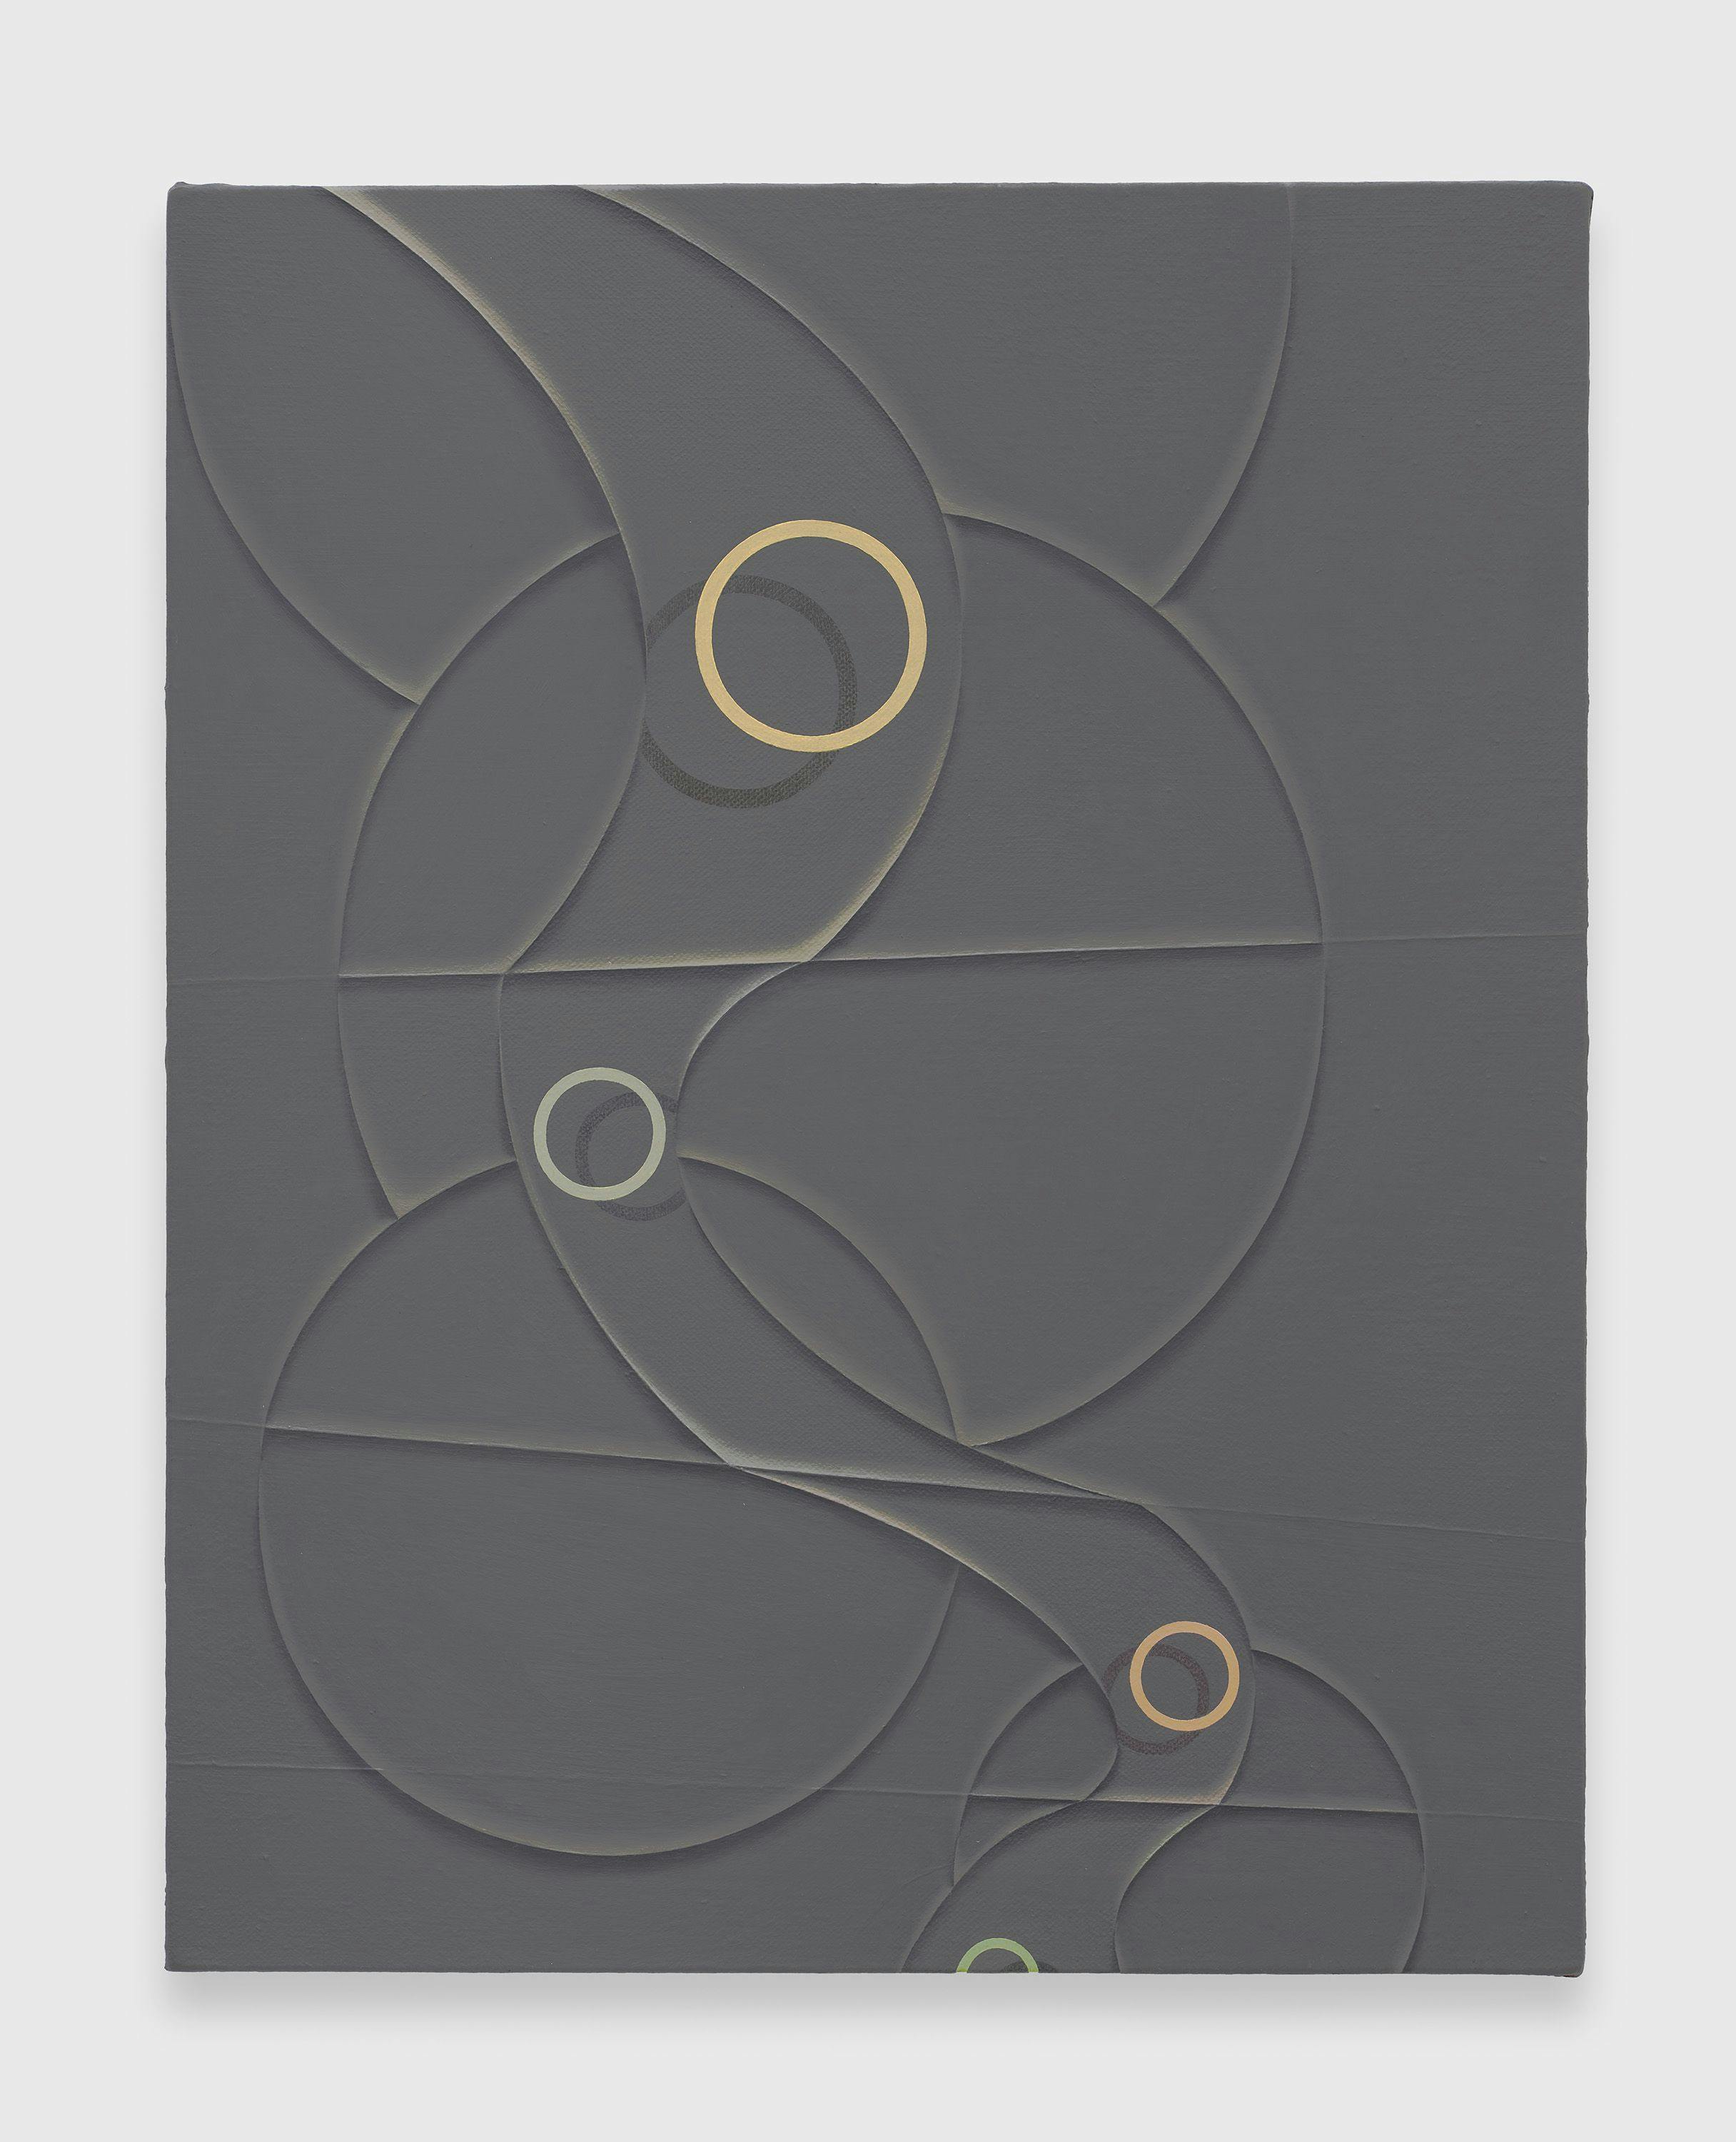 A painting by Tomma Abts, titled Loert, dated 2005.